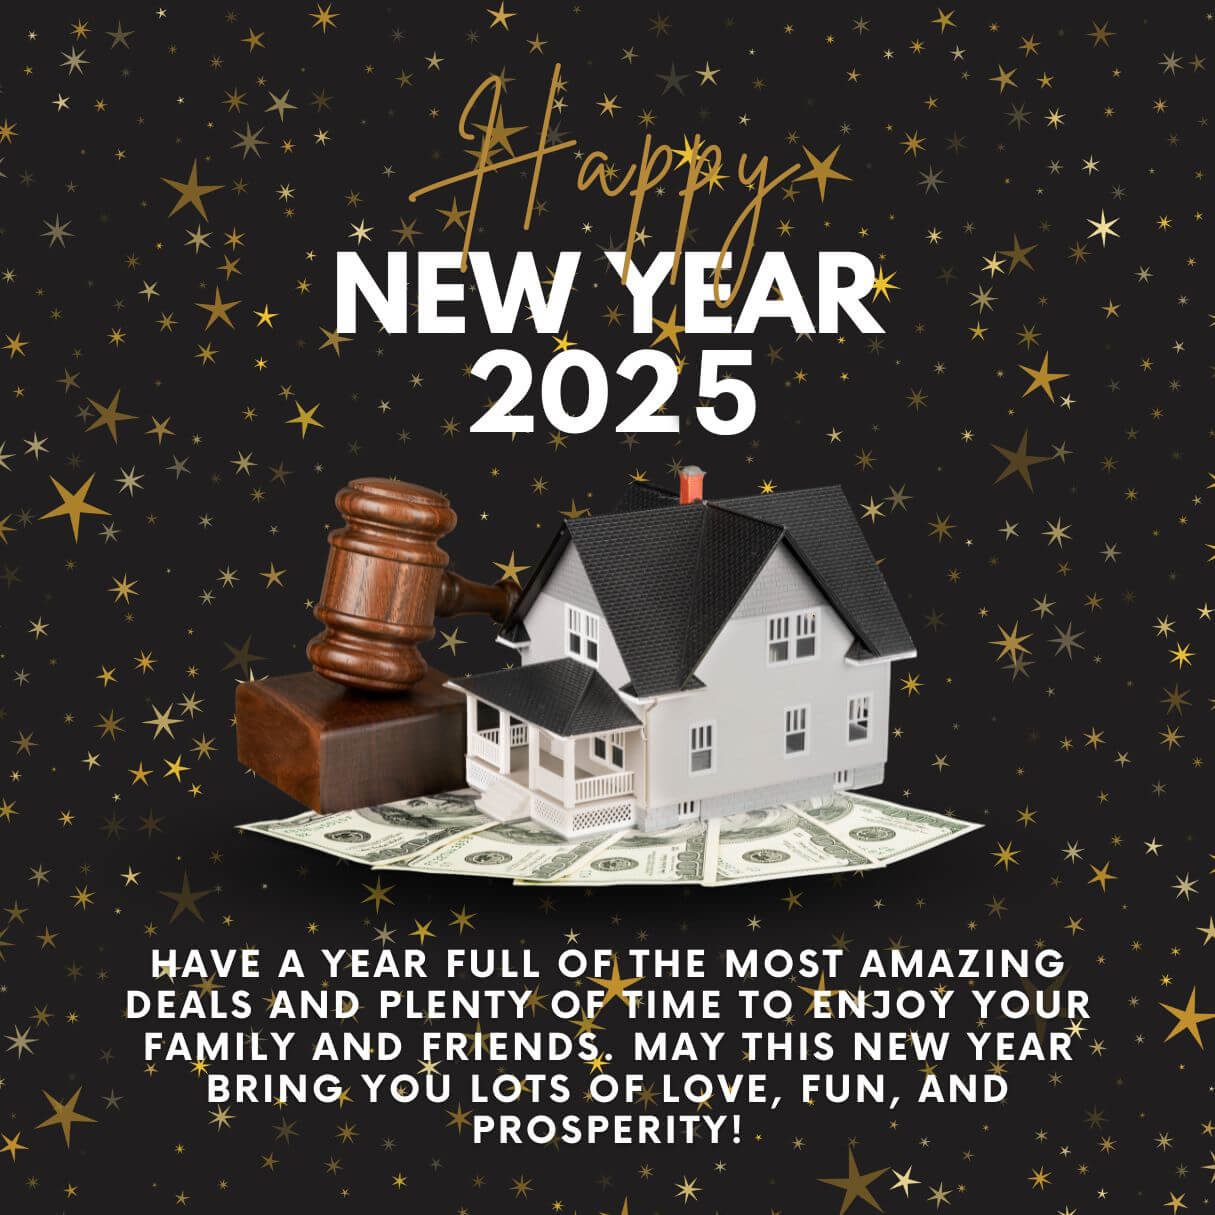 You are currently viewing 100 Real Estate New Year Quotes and Wishes (2025)